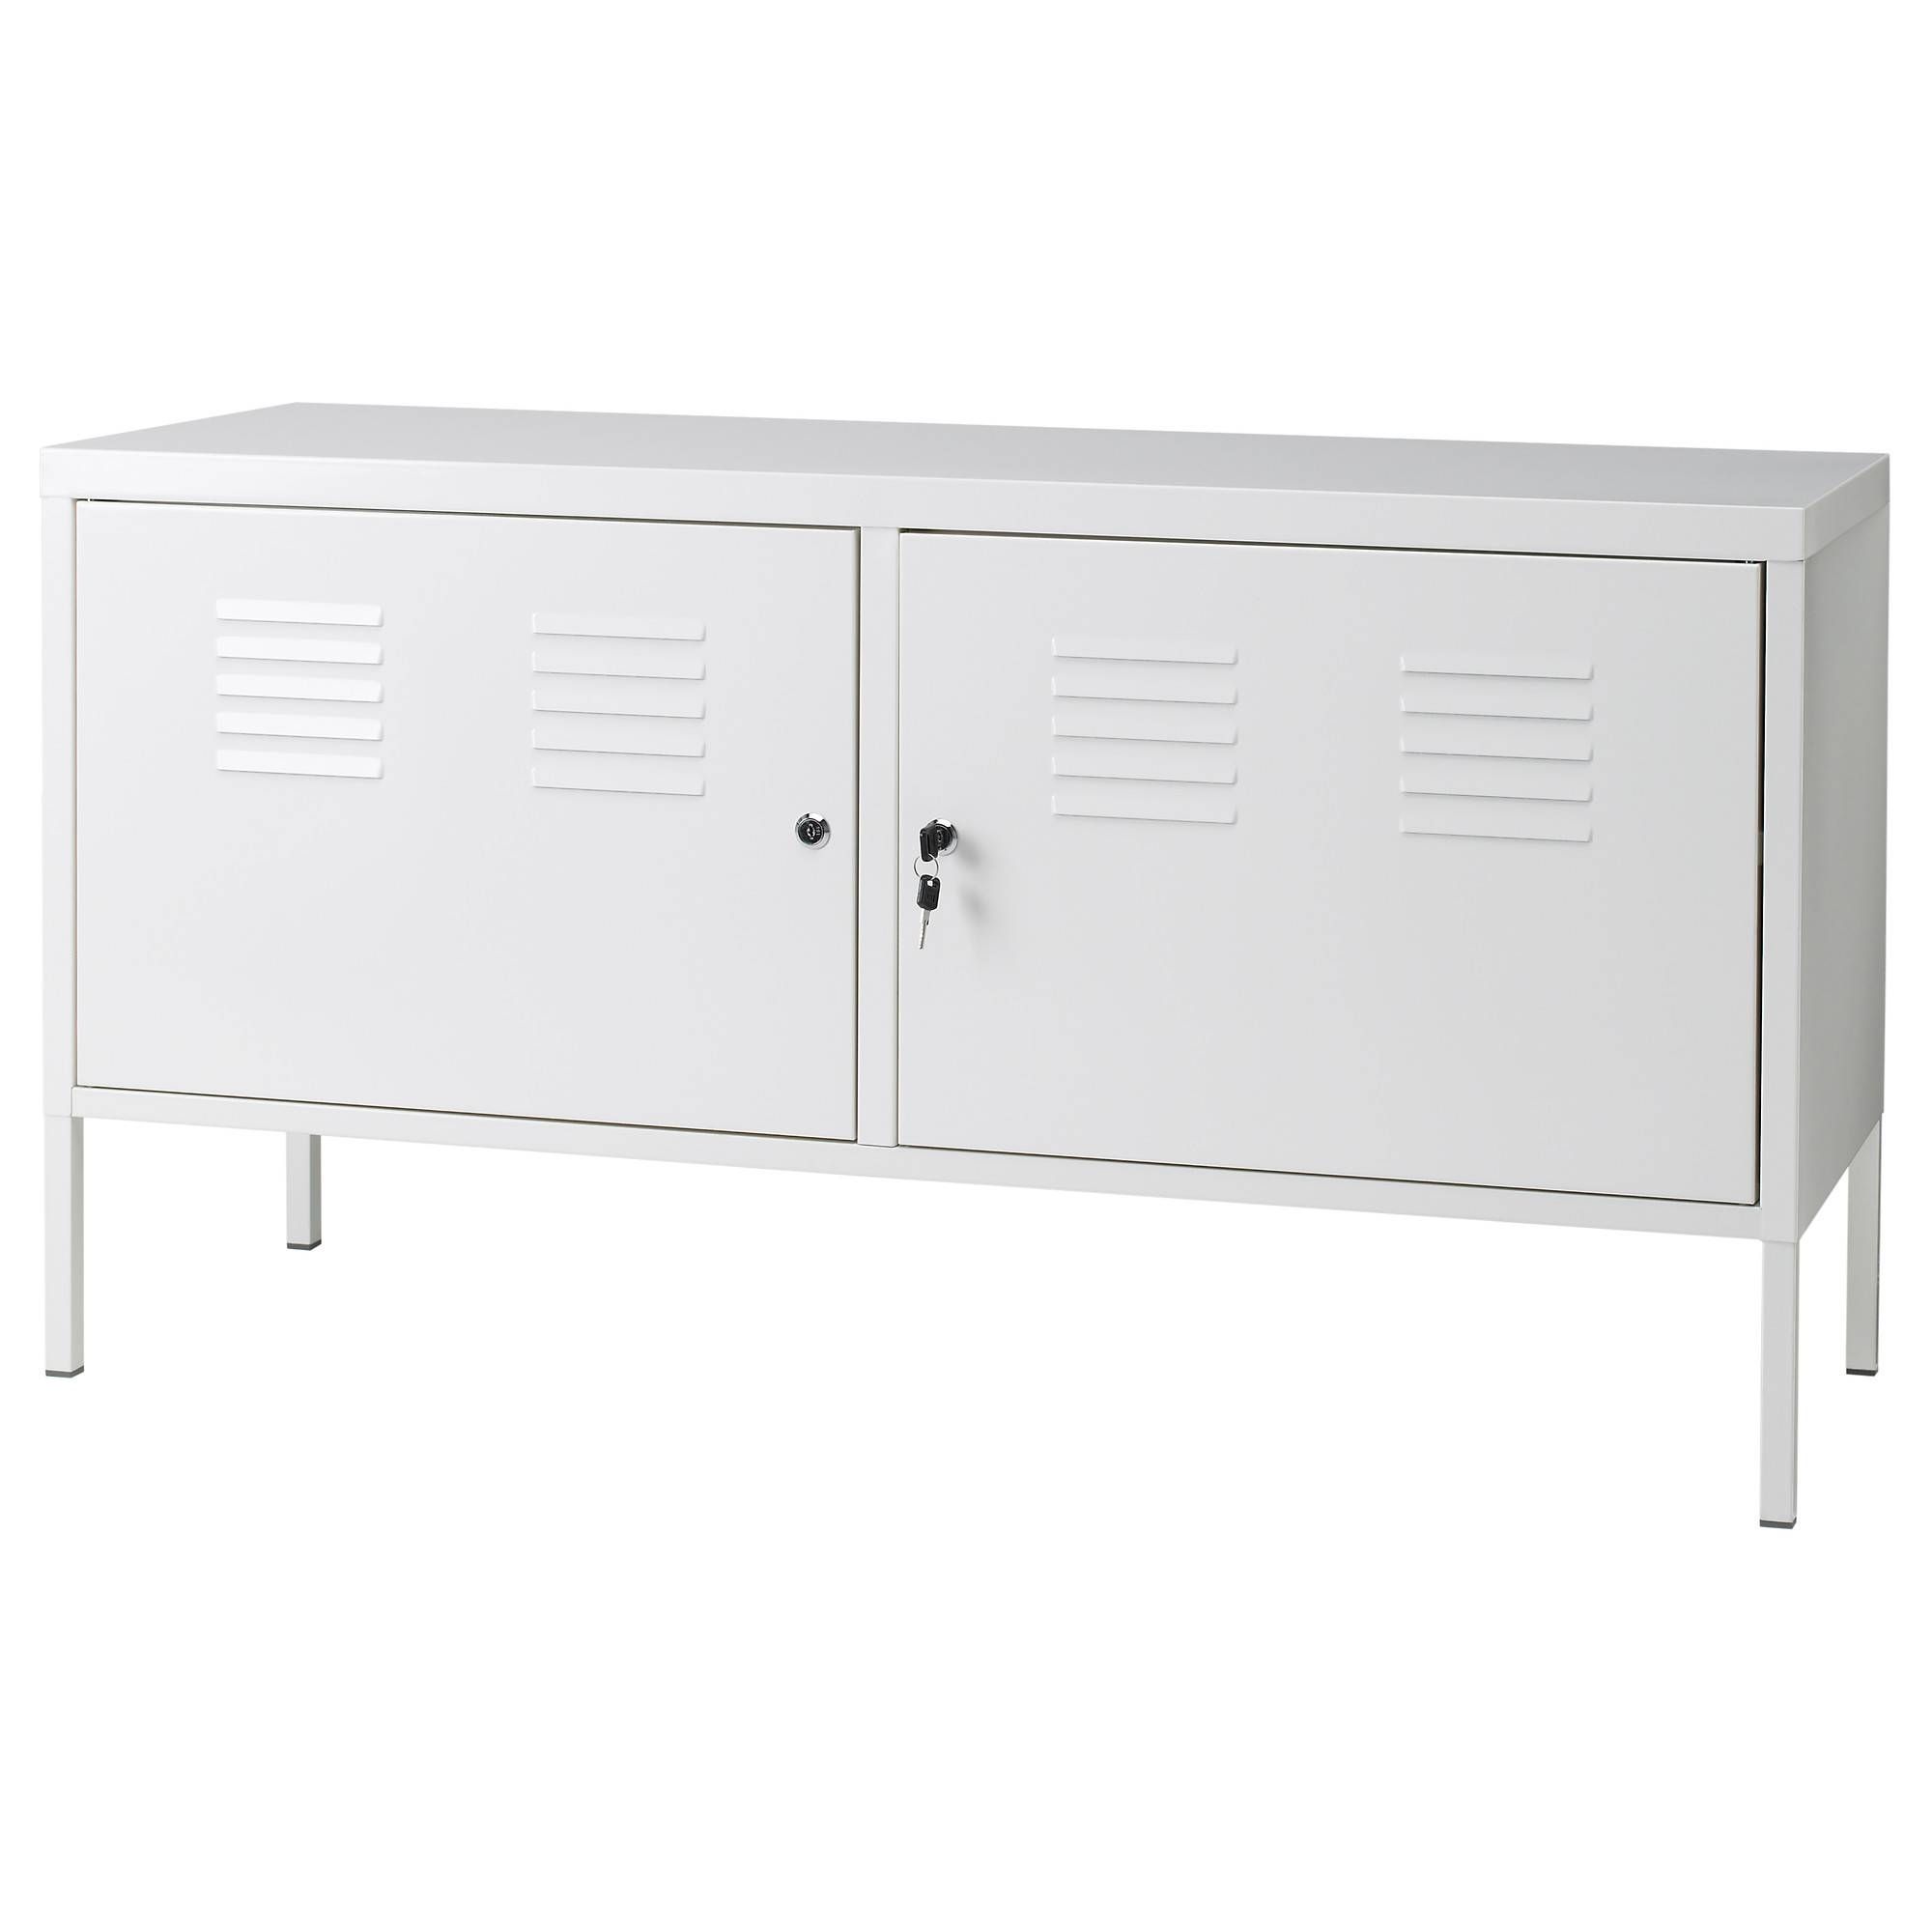 Ikea Ps Cabinet – White – Ikea Throughout White Gloss Ikea Sideboards (View 3 of 15)